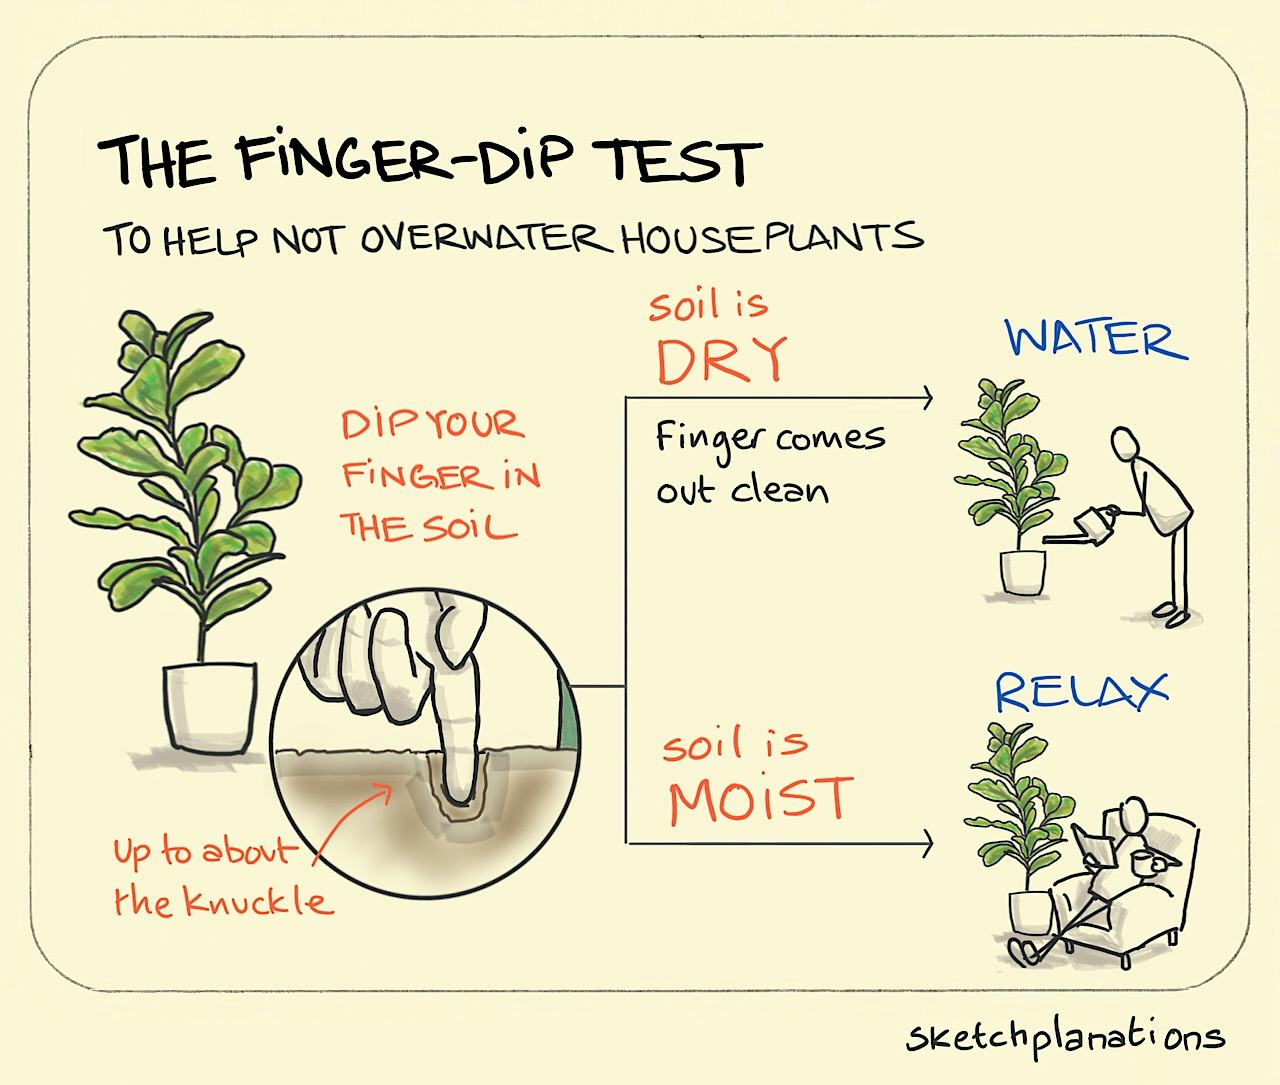 The finger-dip test to not overwater houseplants - Sketchplanations